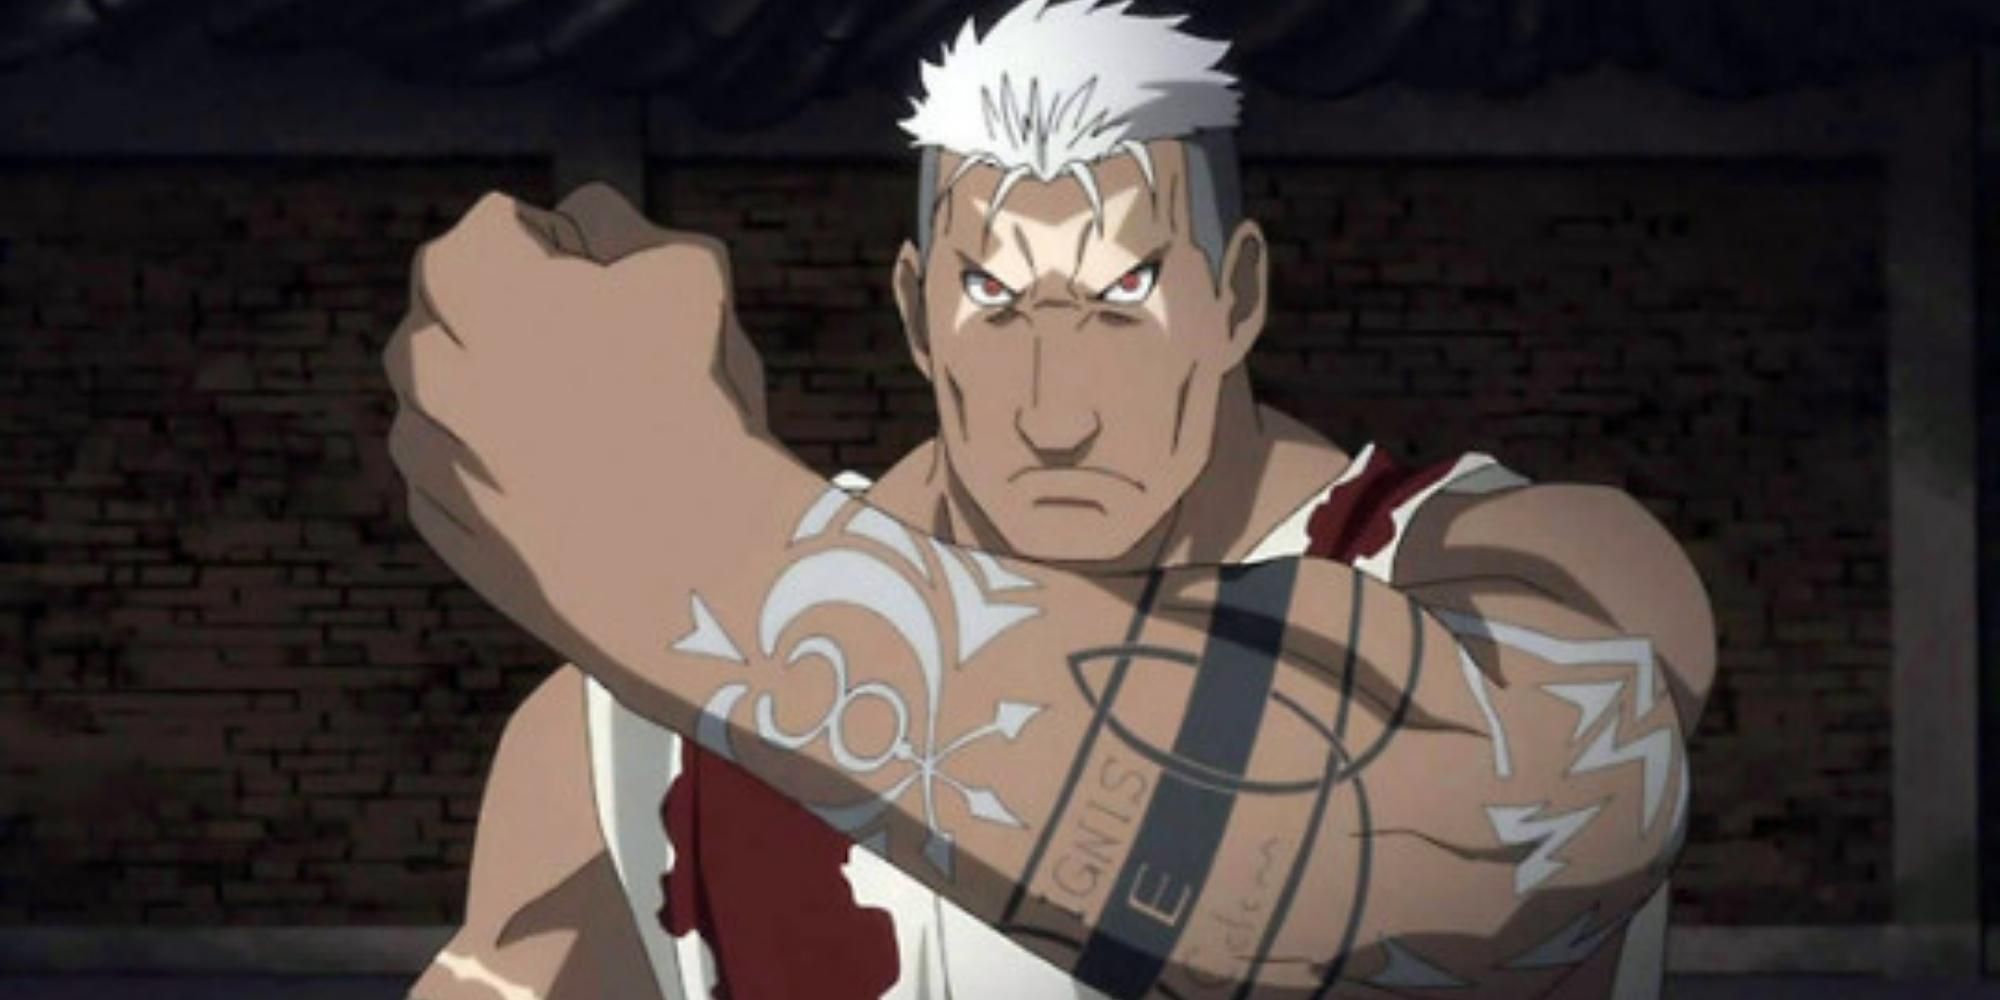 Scar with visible tatoos in Fullmetal Alchemist